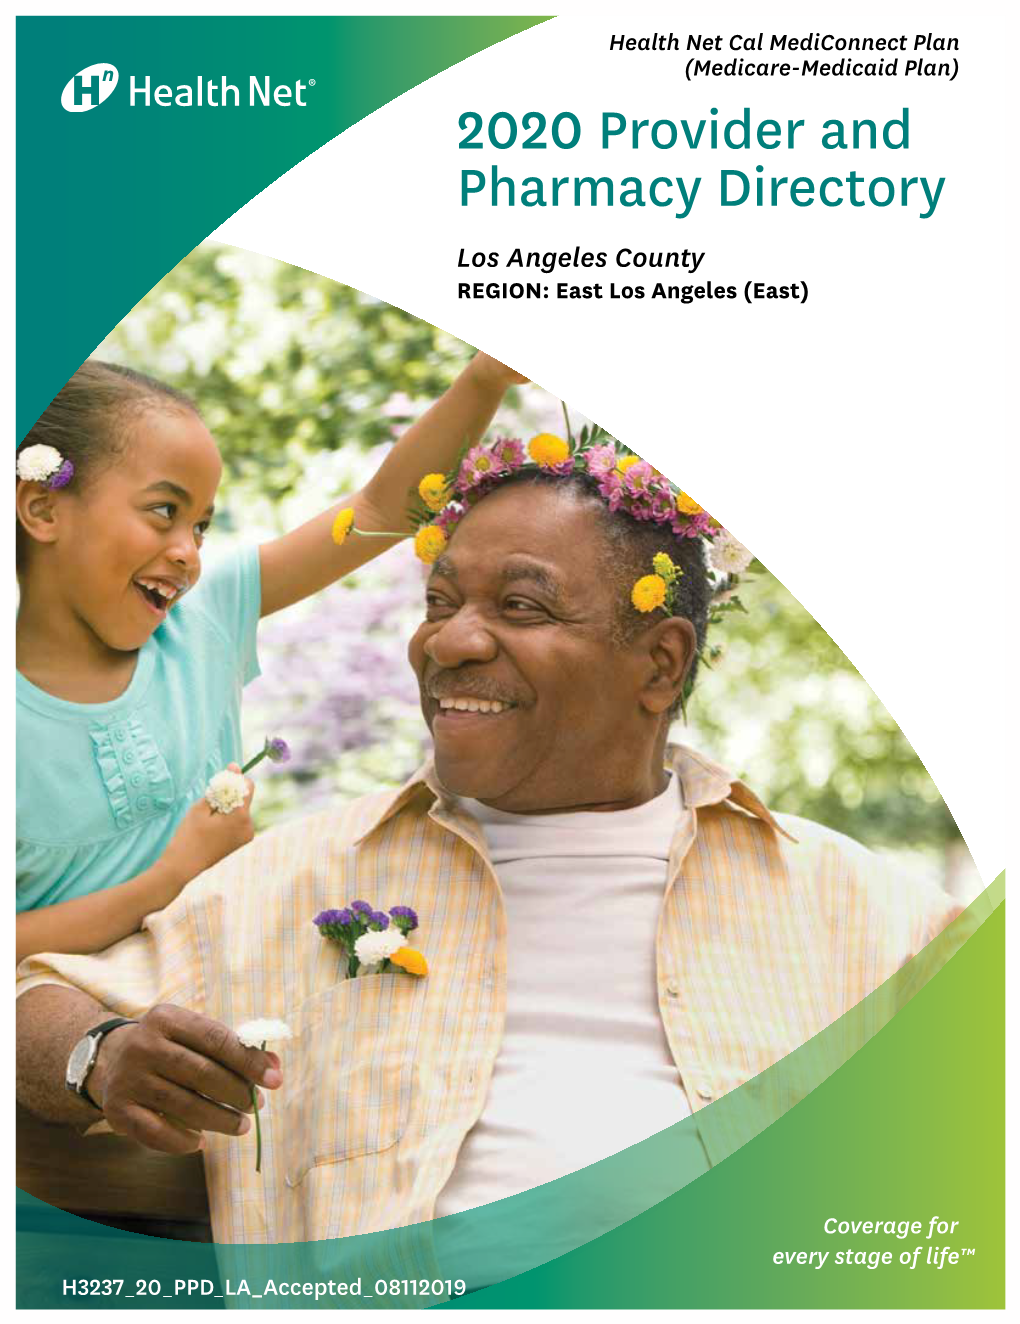 2020 Provider and Pharmacy Directory Los Angeles County REGION: East Los Angeles (East)